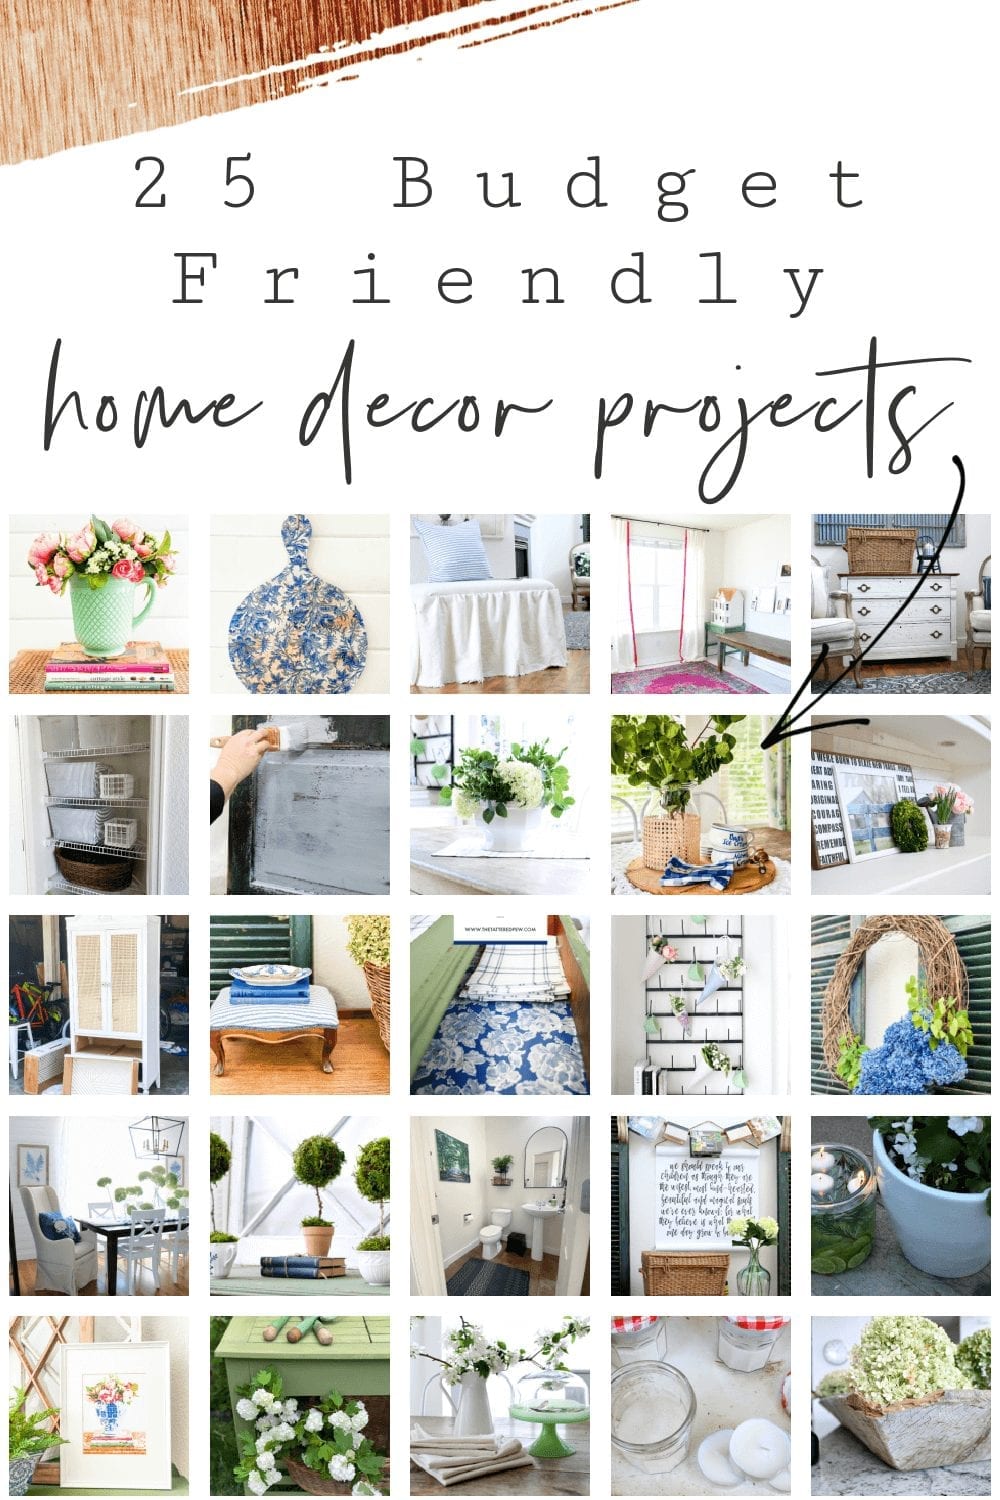 https://www.thetatteredpew.com/wp-content/uploads/25-budget-friendly-home-decor-projects-1.jpg